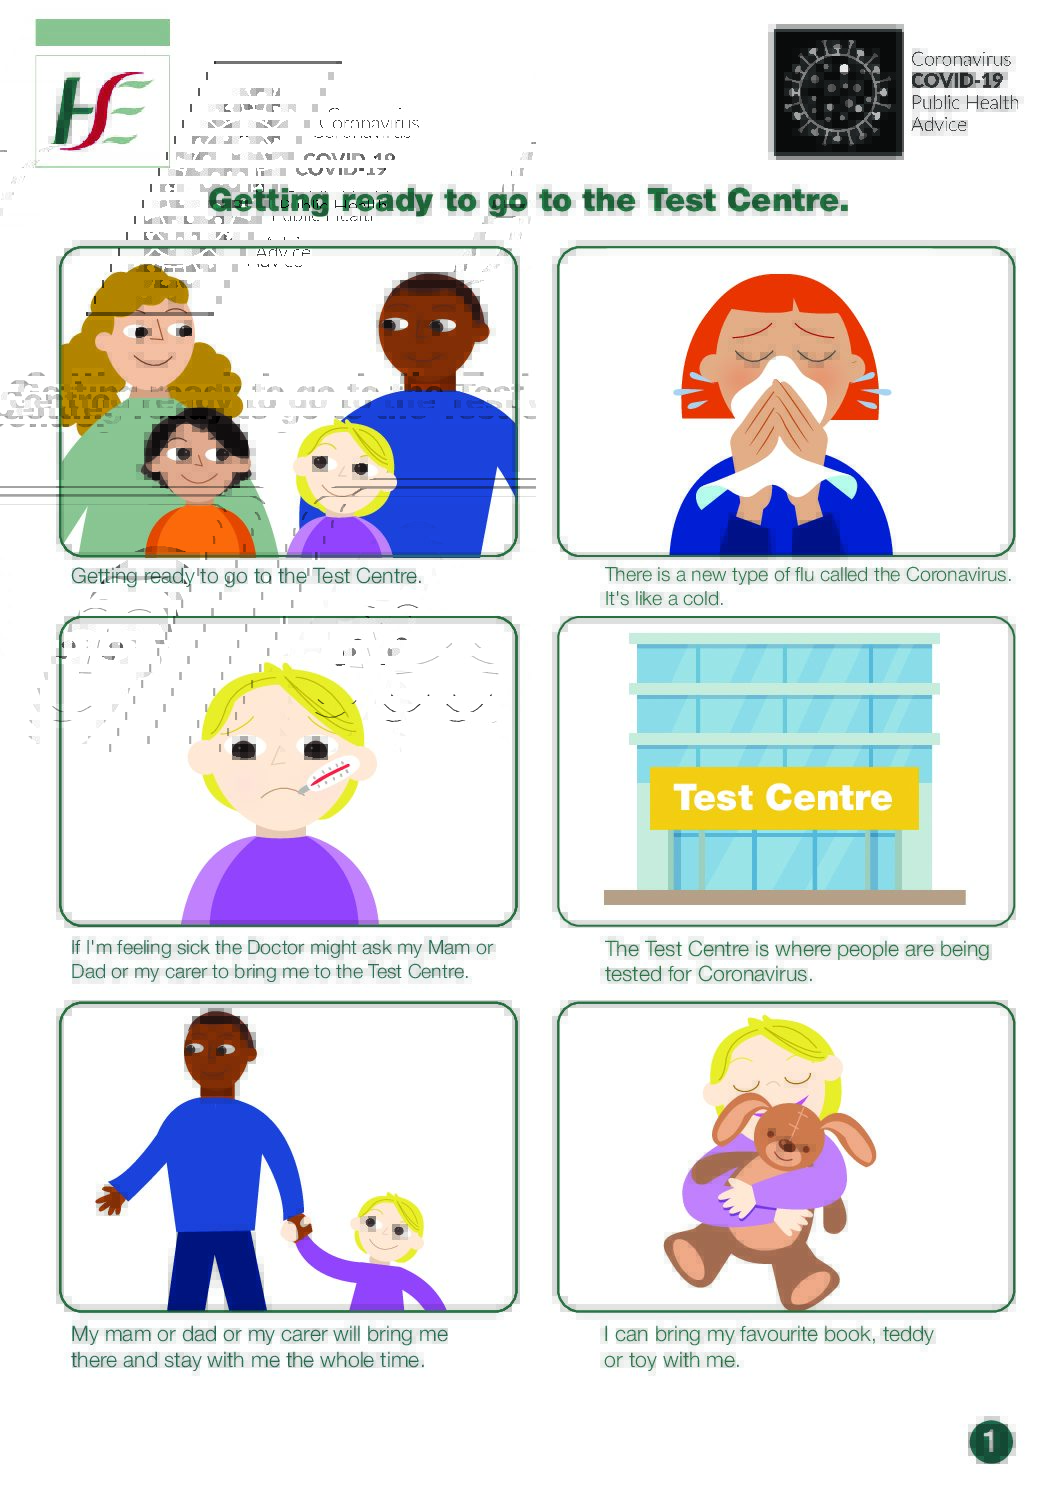 COVID-19: Getting Ready to Go to The Test Center (Guide For Children)